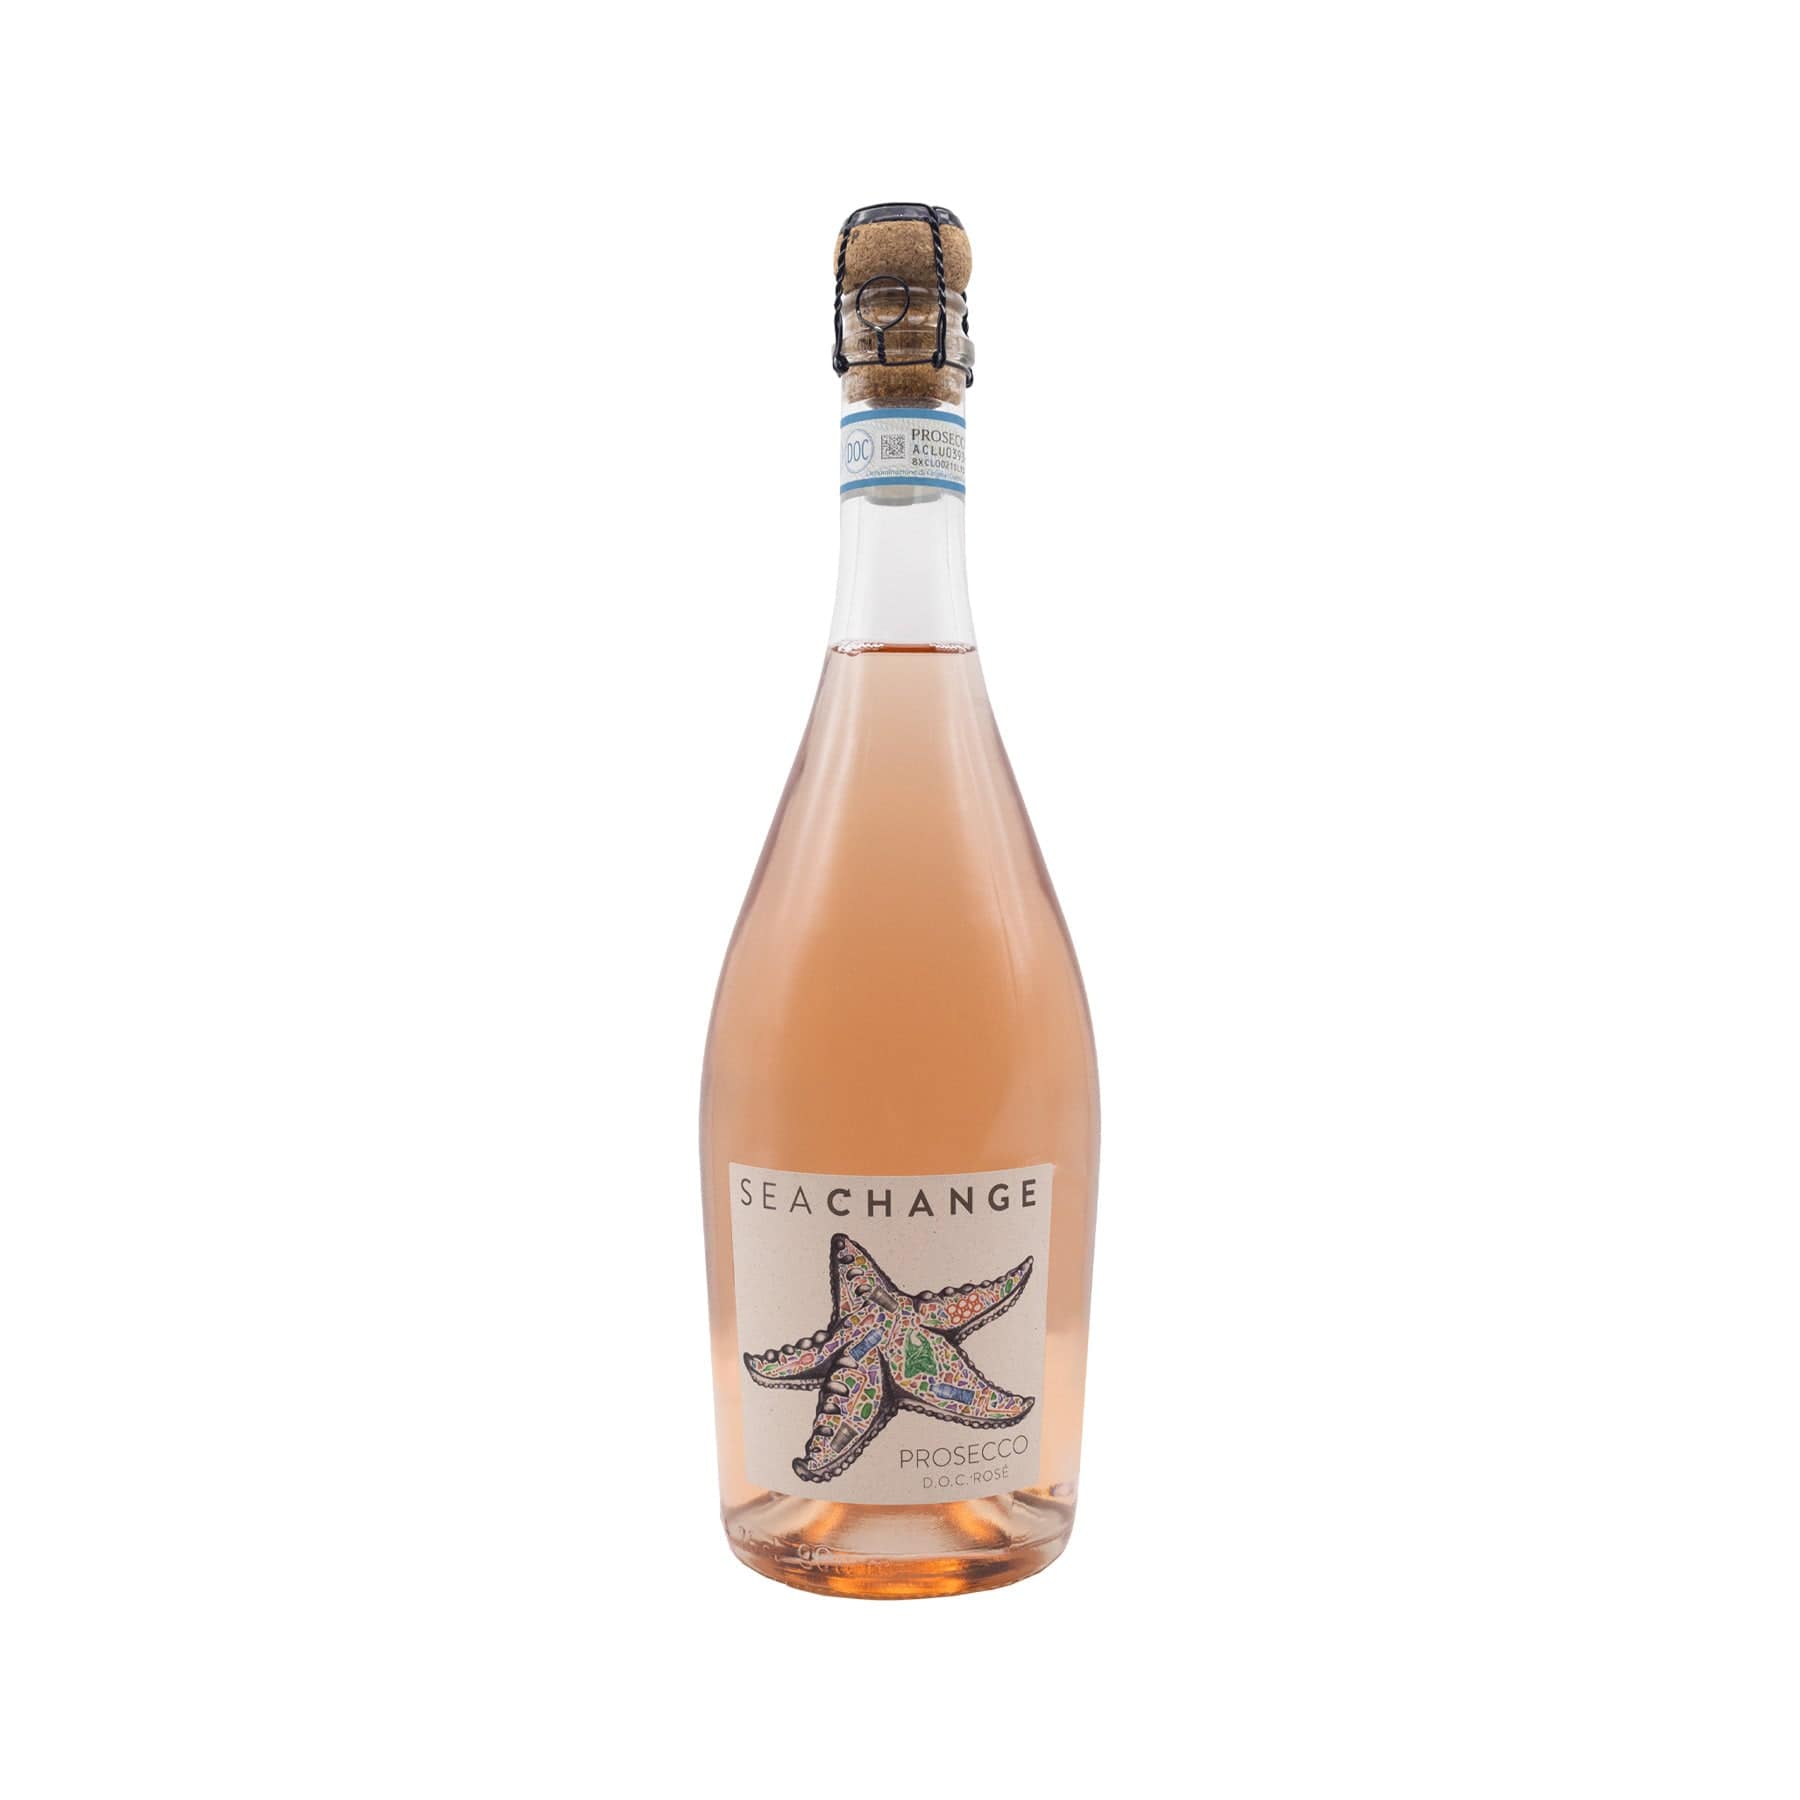 Seachange Prosecco rosé sparkling wine bottle with starfish label, cork sealed, isolated on white background